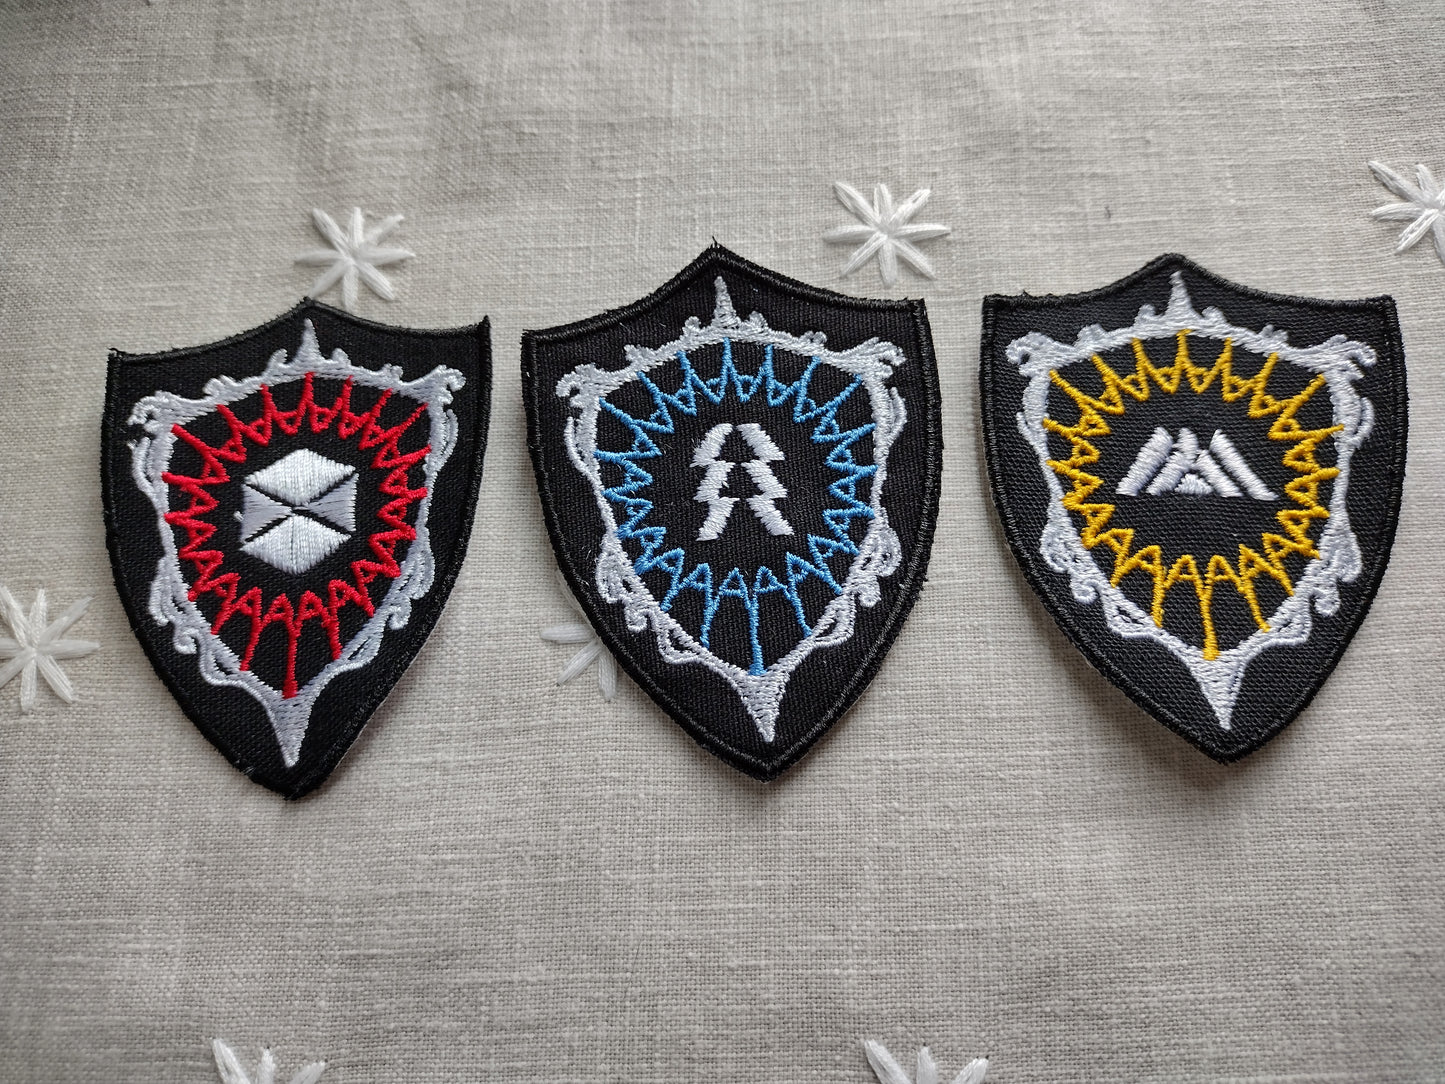 Shield class patches